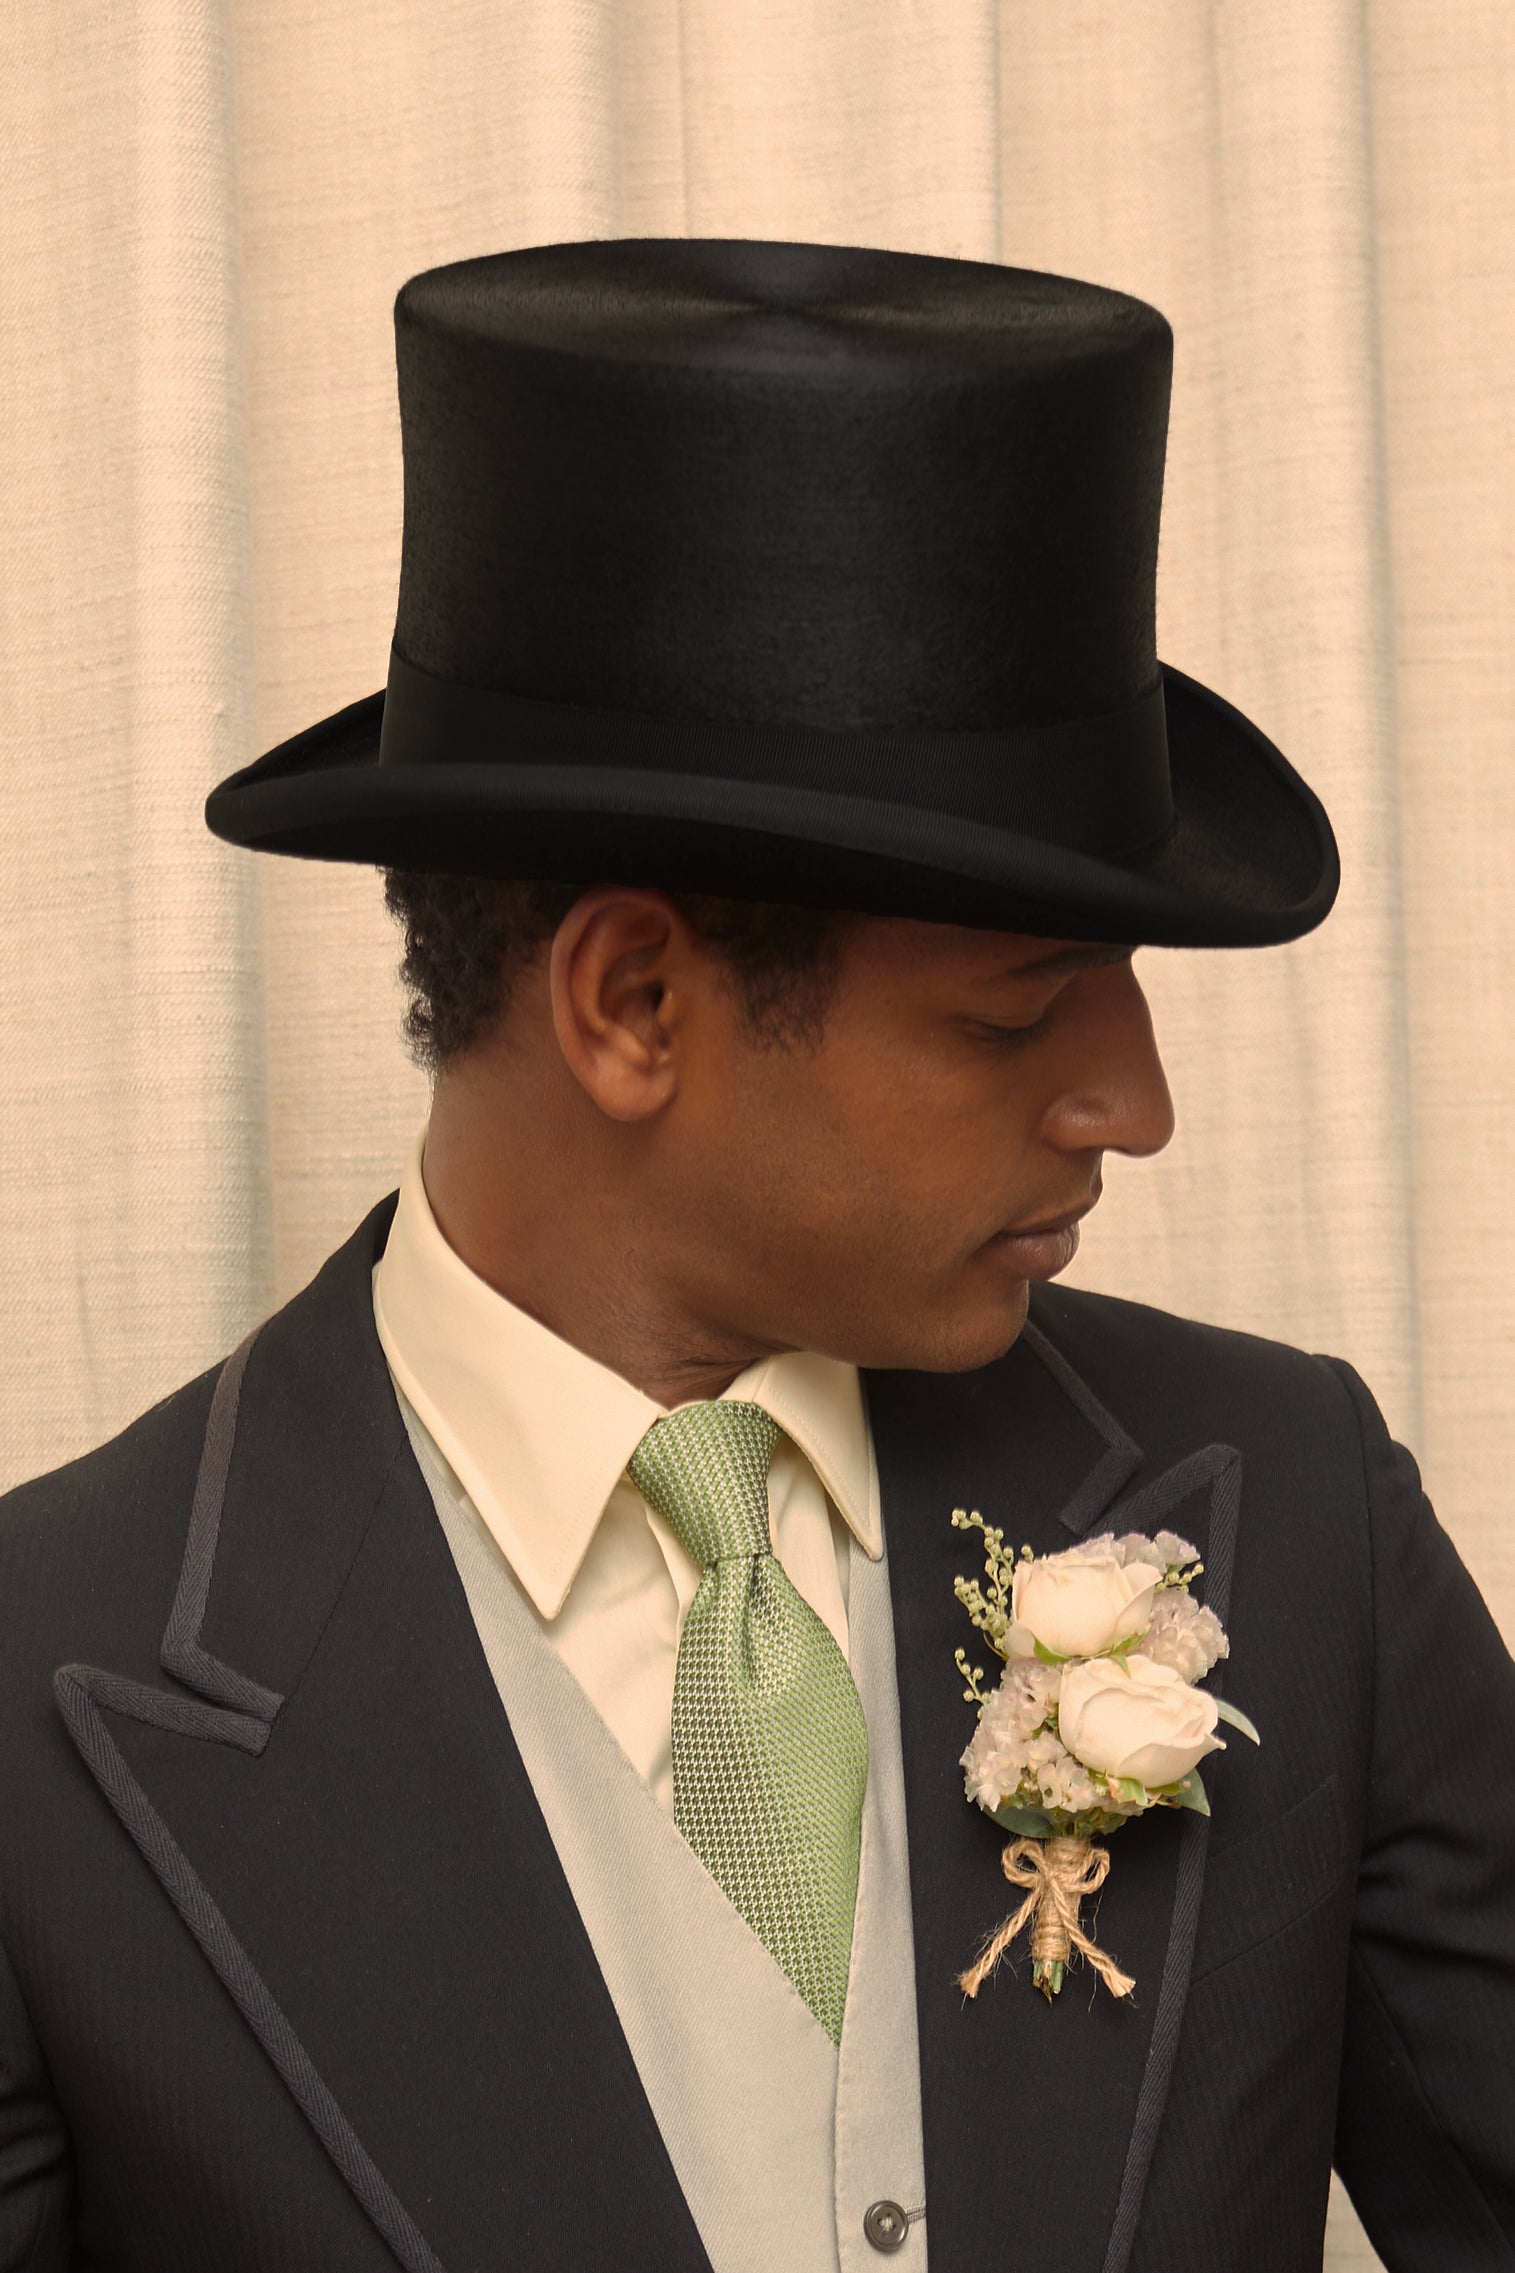 London Top Hat - Products - Lock & Co. Hatters London UK